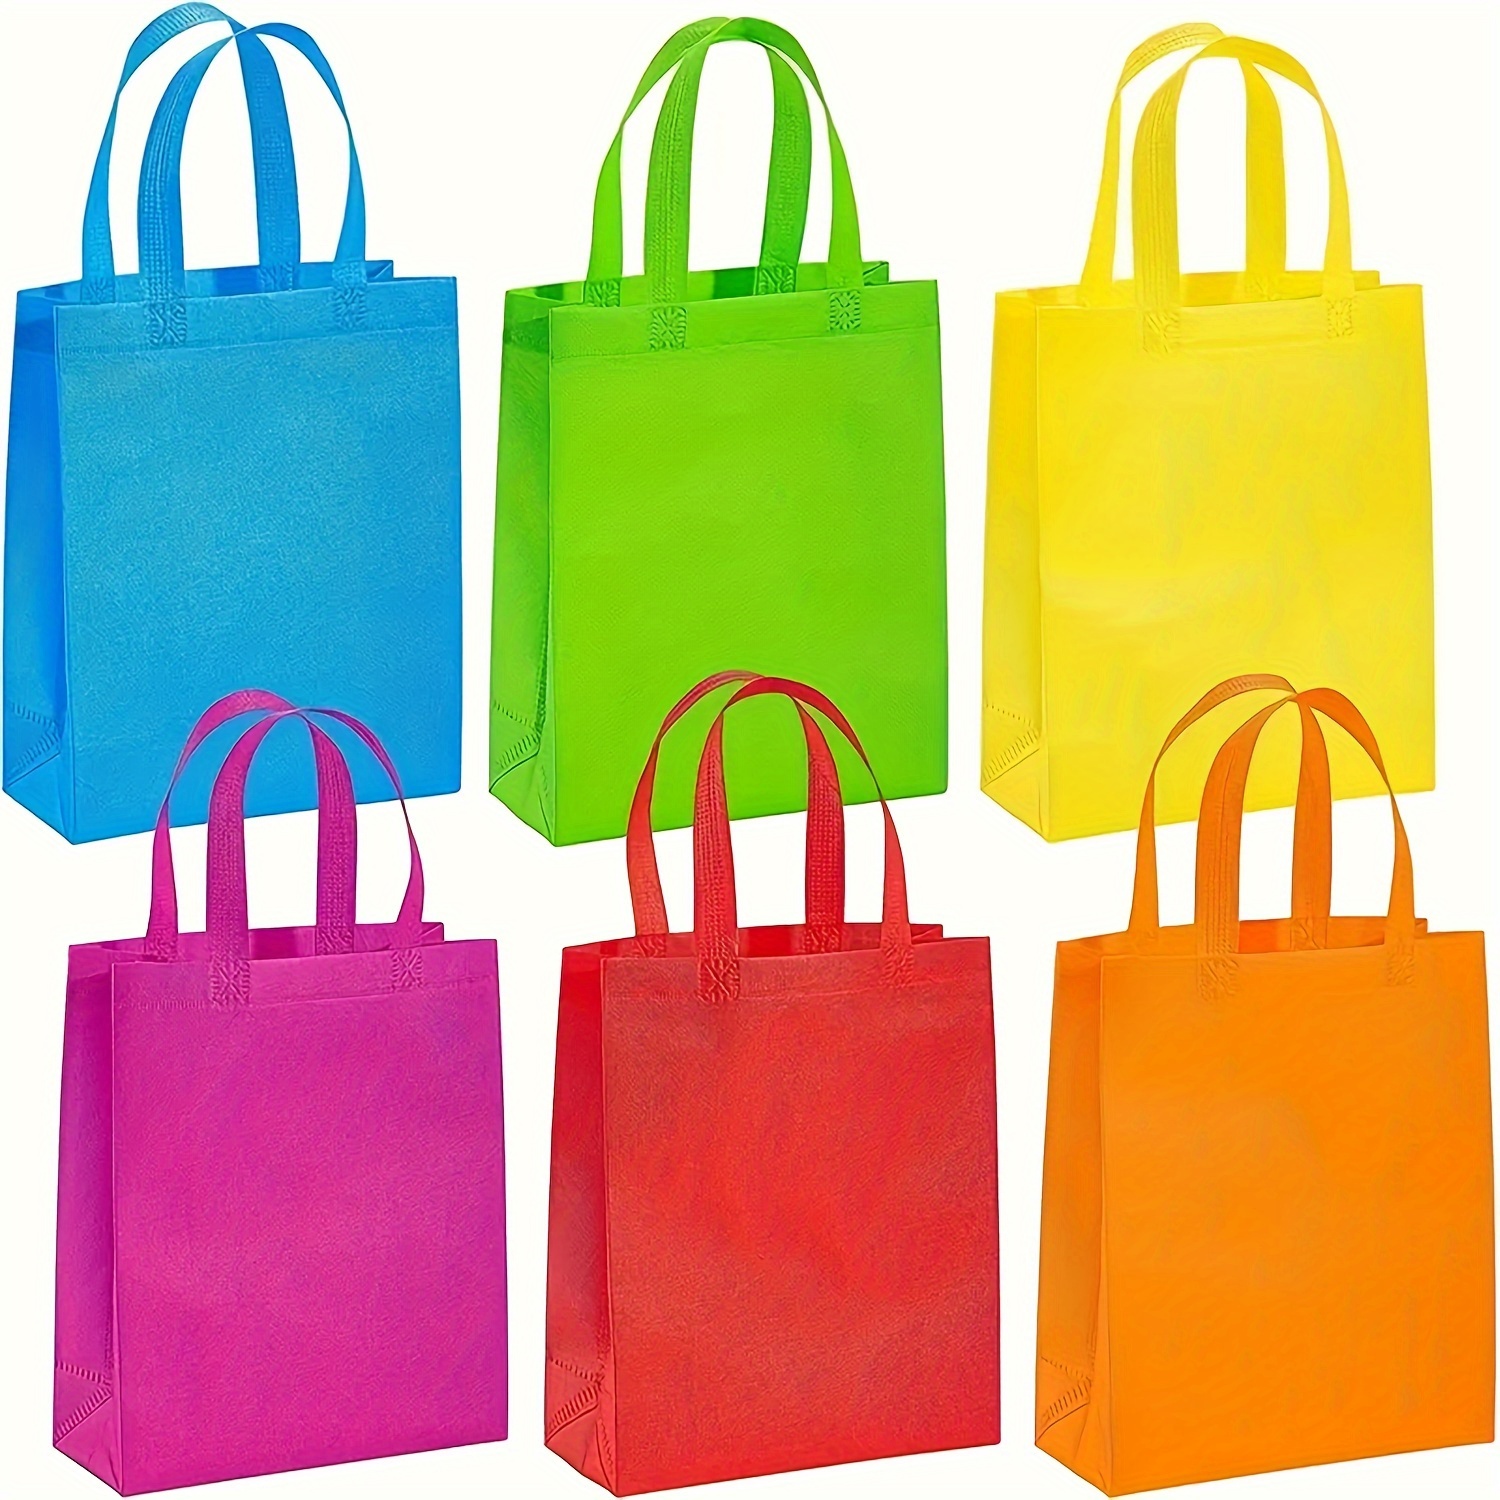 

12 Pack Reusable Gift Bags With Handles, Durable Polyester Party Favor Bags For Birthday, Halloween, Christmas, Thanksgiving, Wedding Celebrations